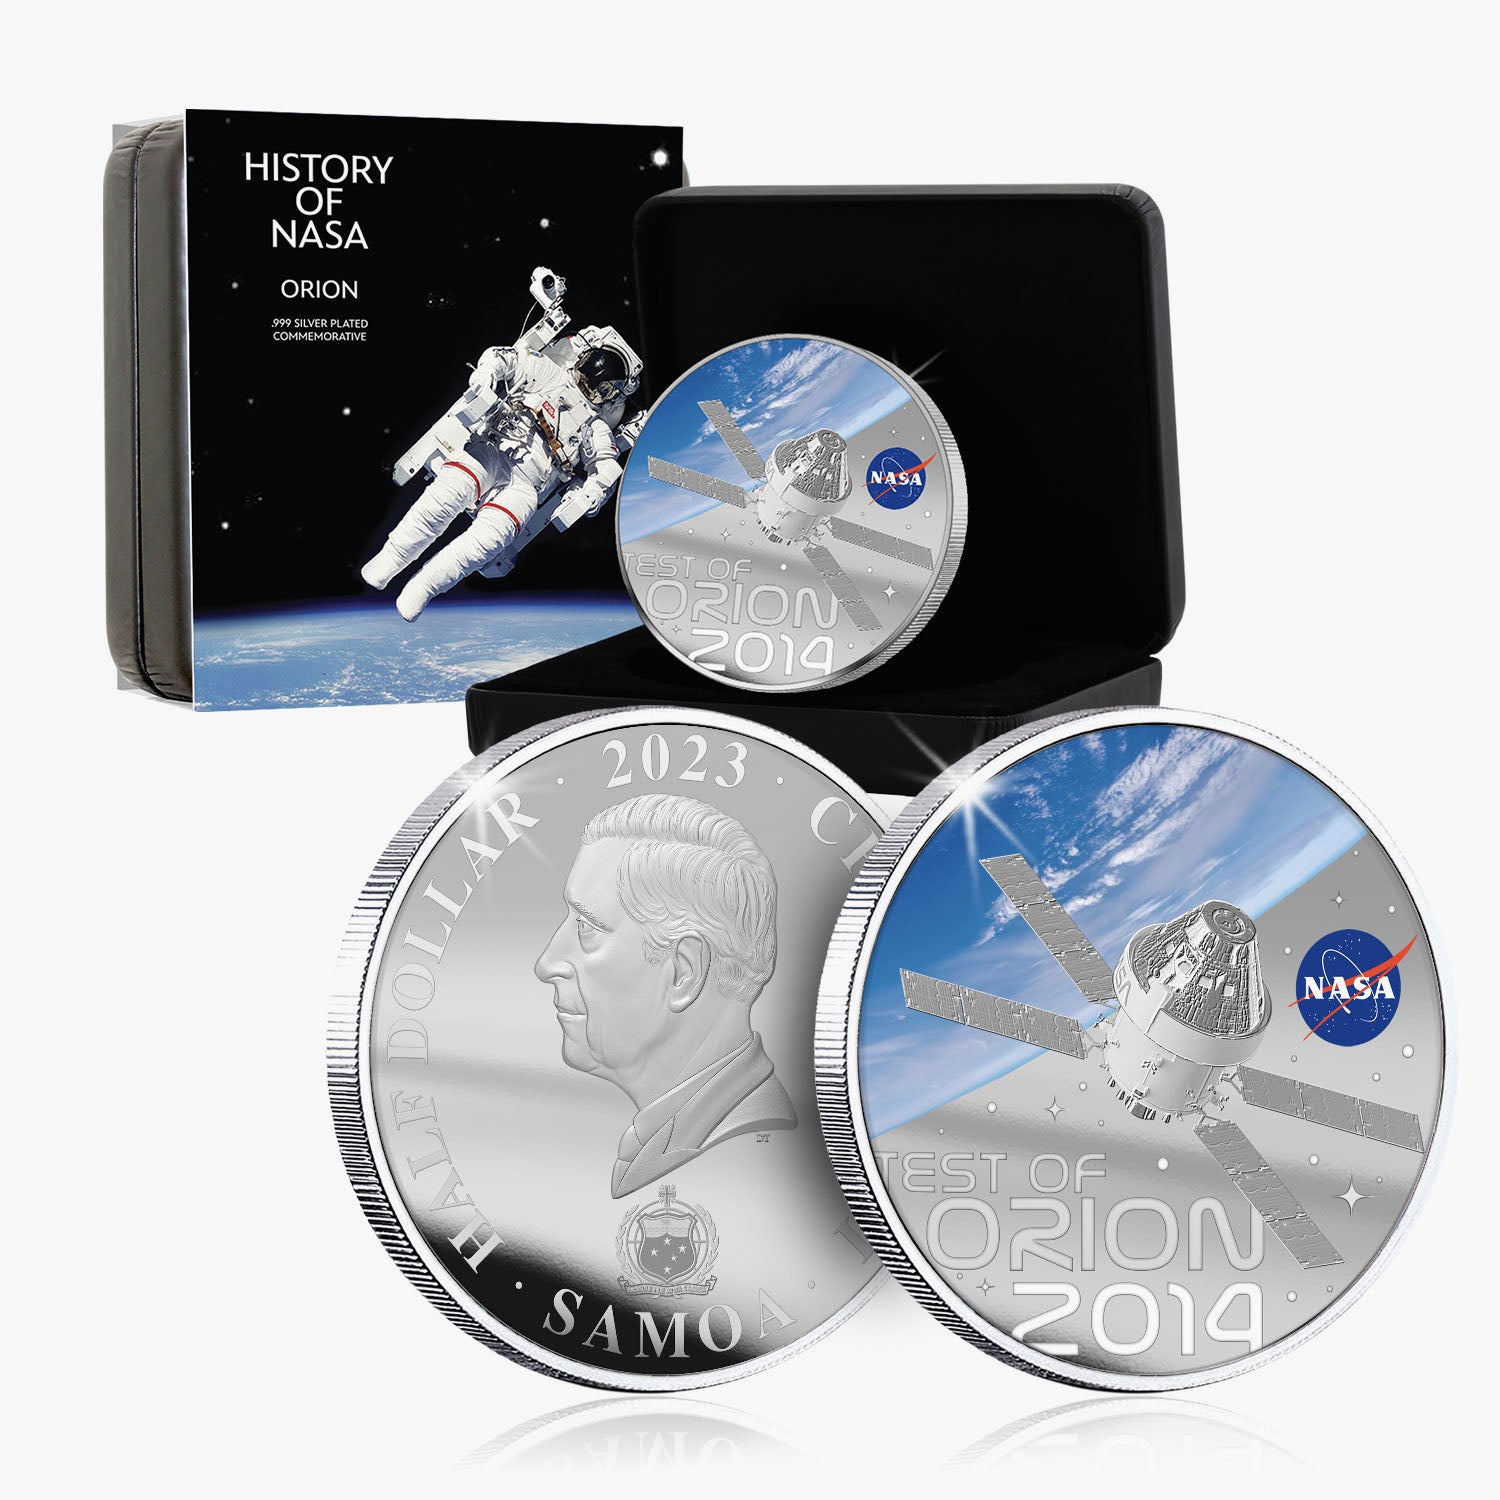 NASA 2023 Test of Orion 50mm Silver-plated Coin